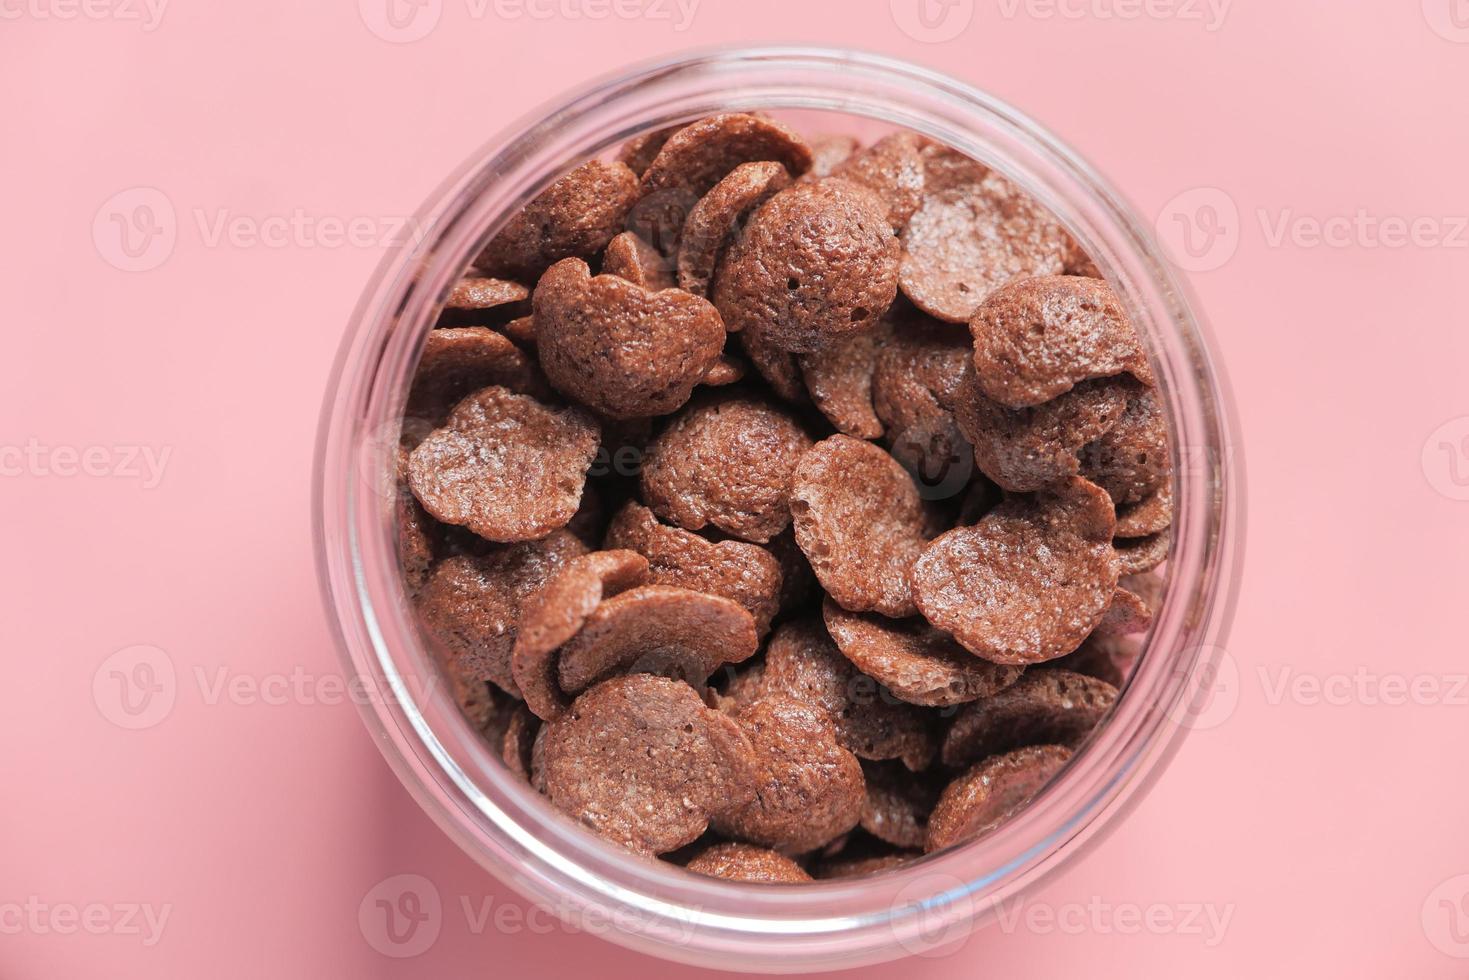 Top view of chocolate corn flakes in a bowl on pink background photo